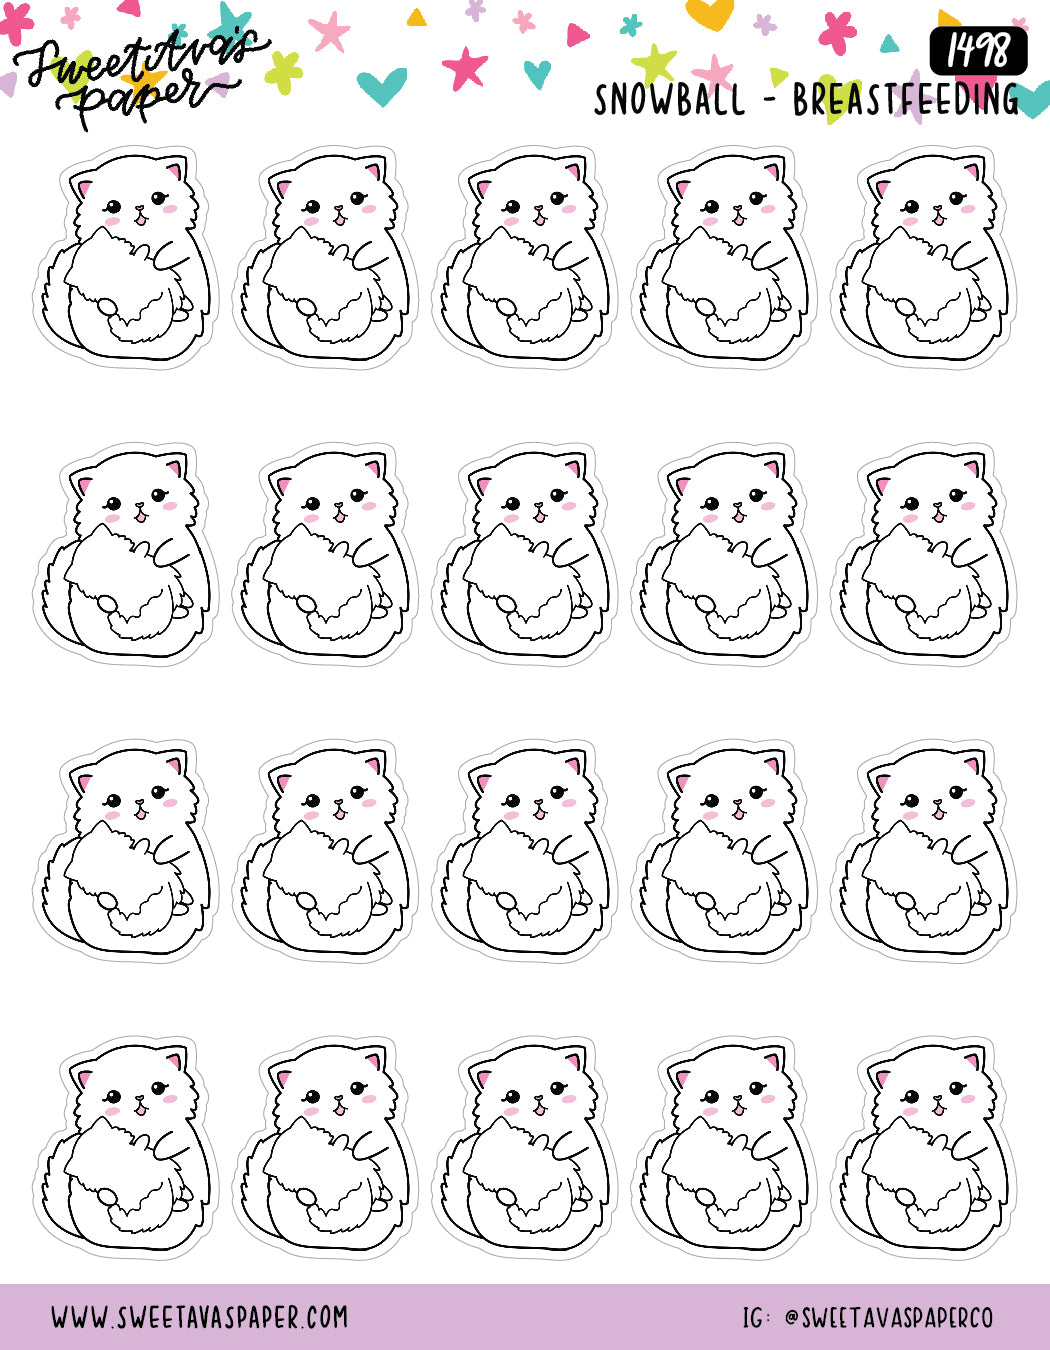 Breastfeeding Planner Stickers - Snowball The Cat [1498]